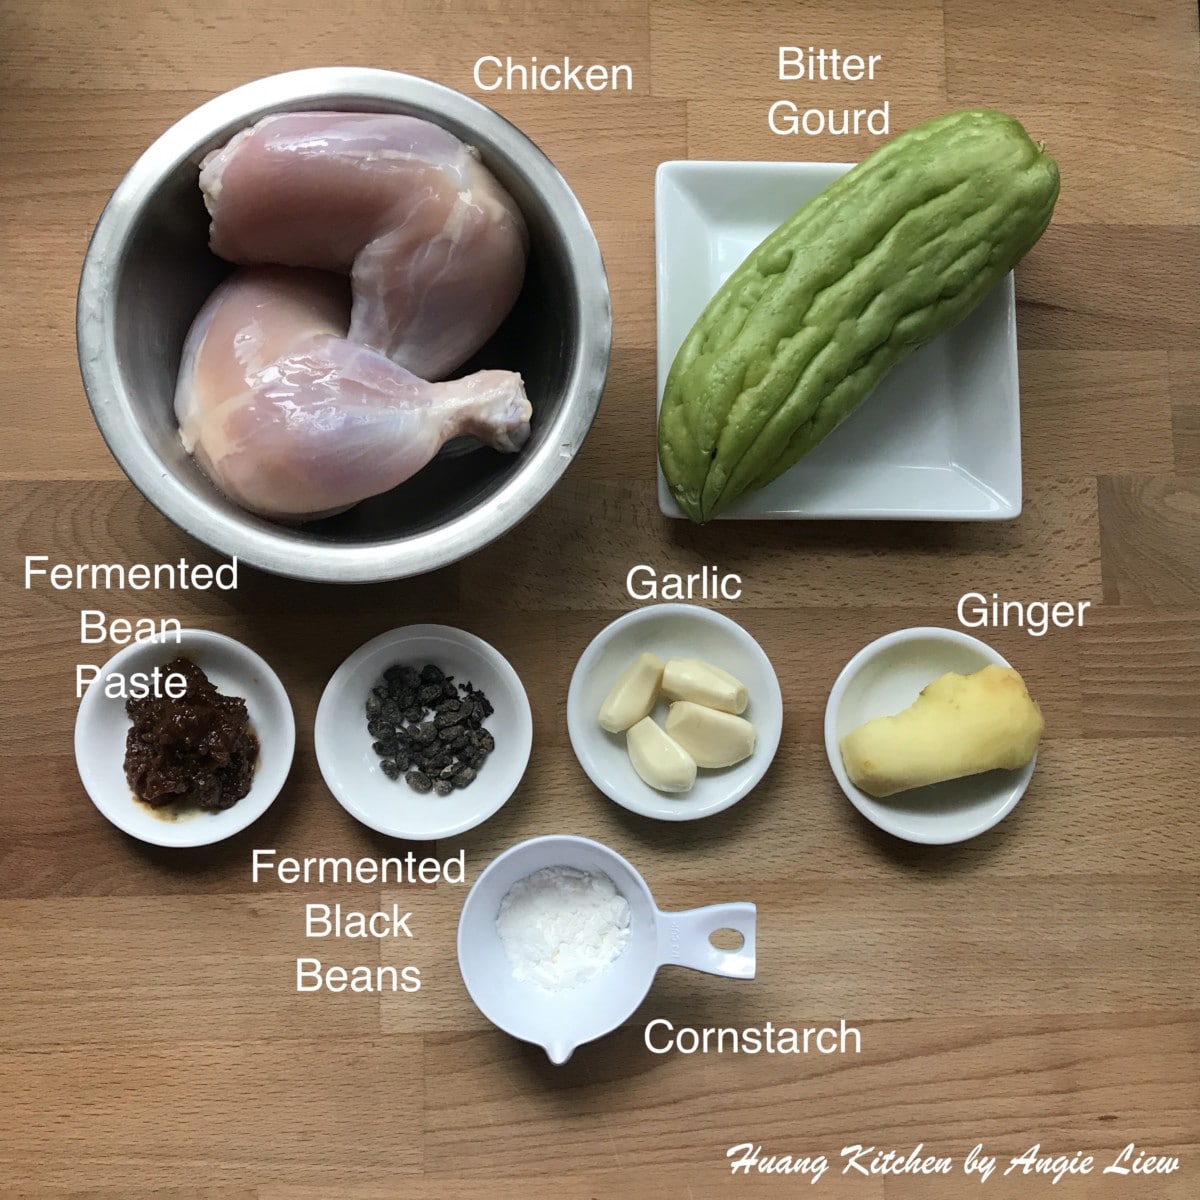 Ingredients to cook the dish.